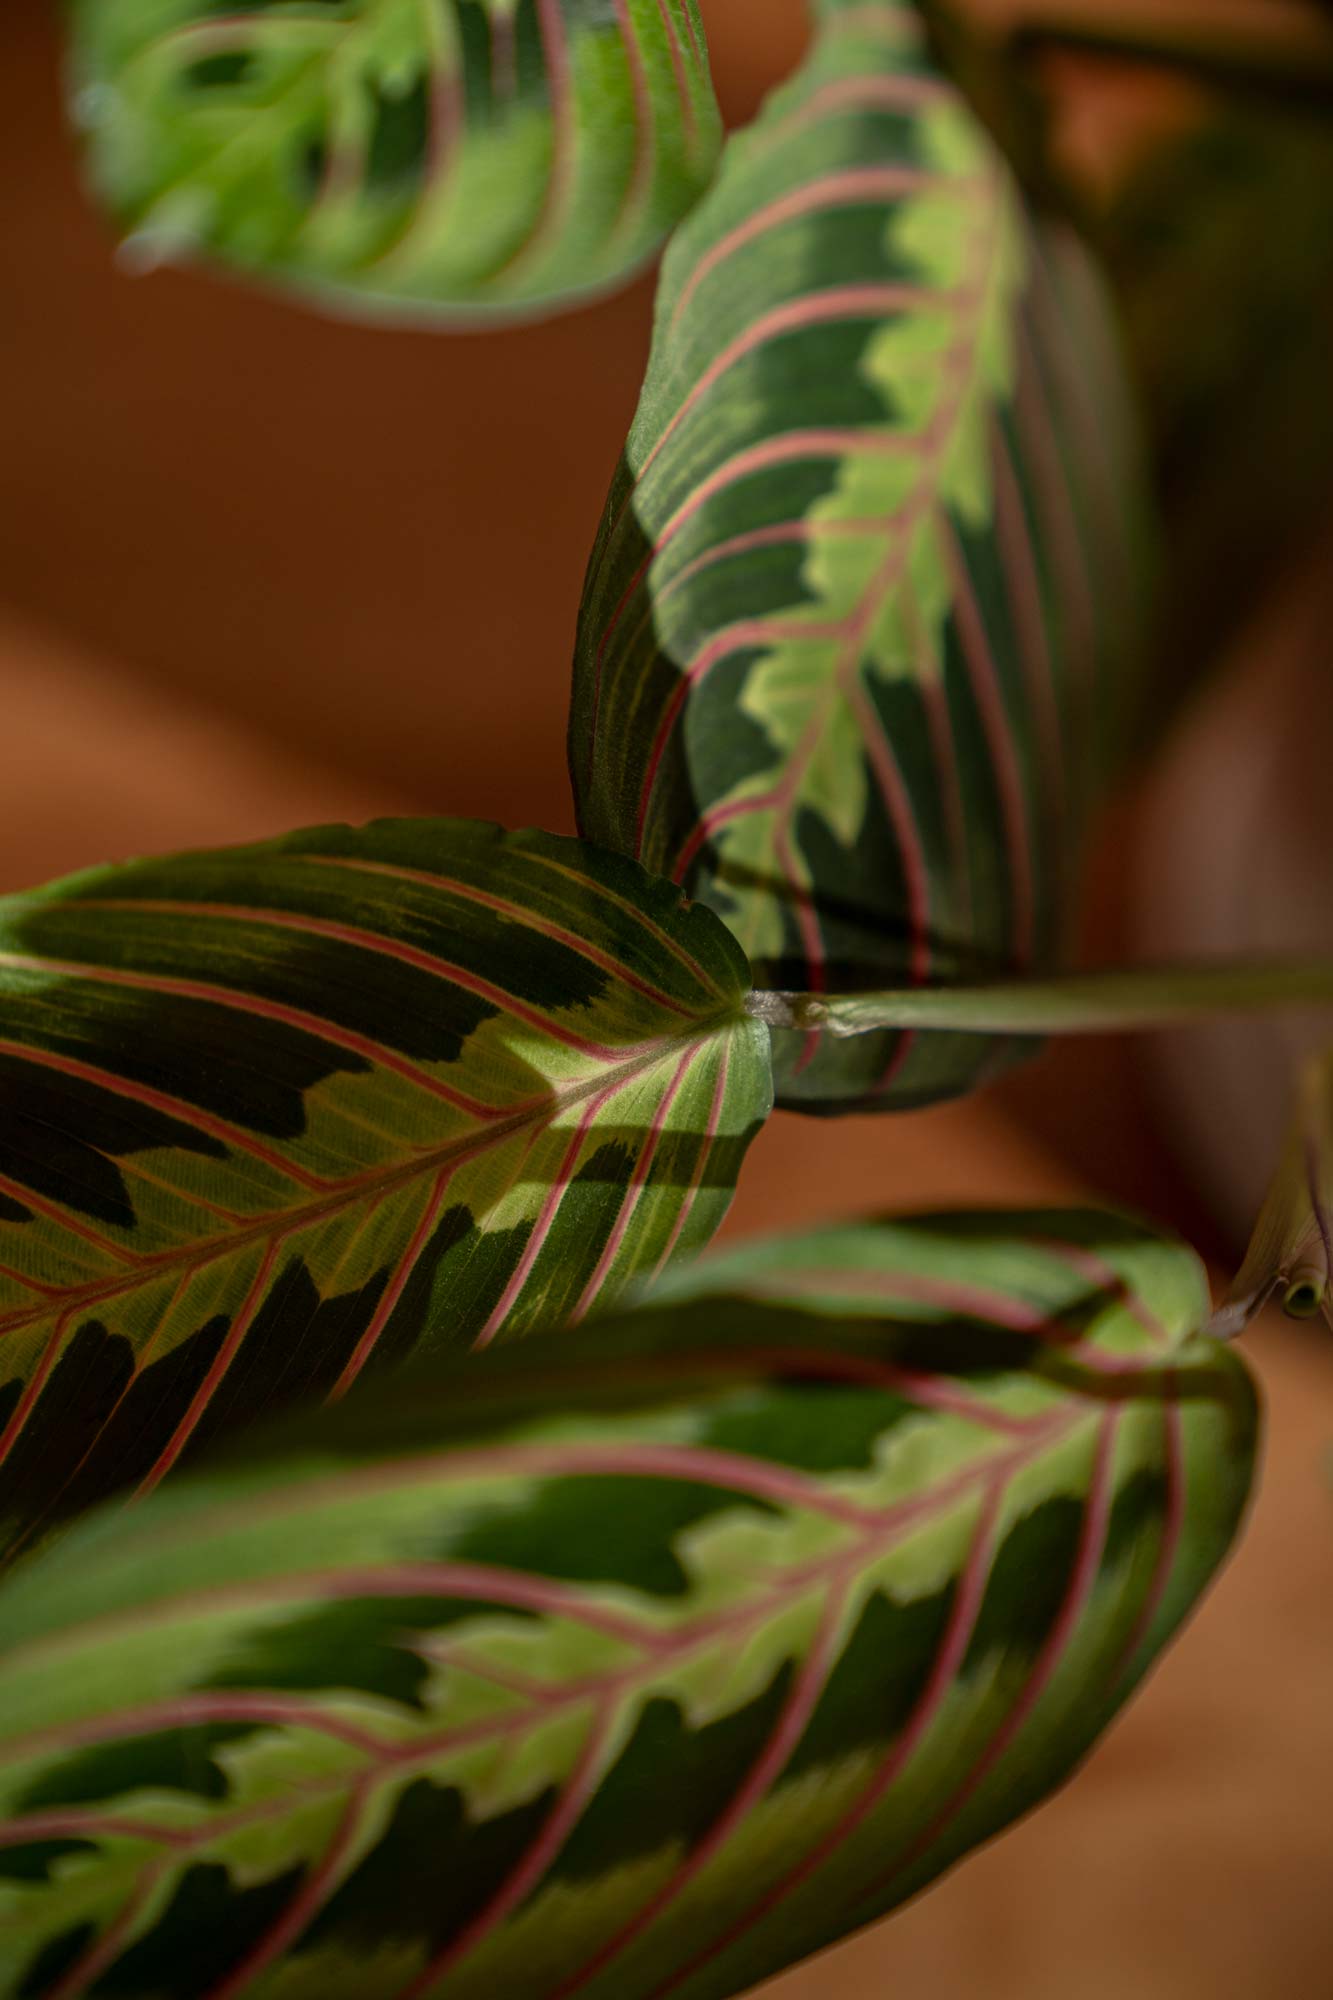 High quality photographs of plants